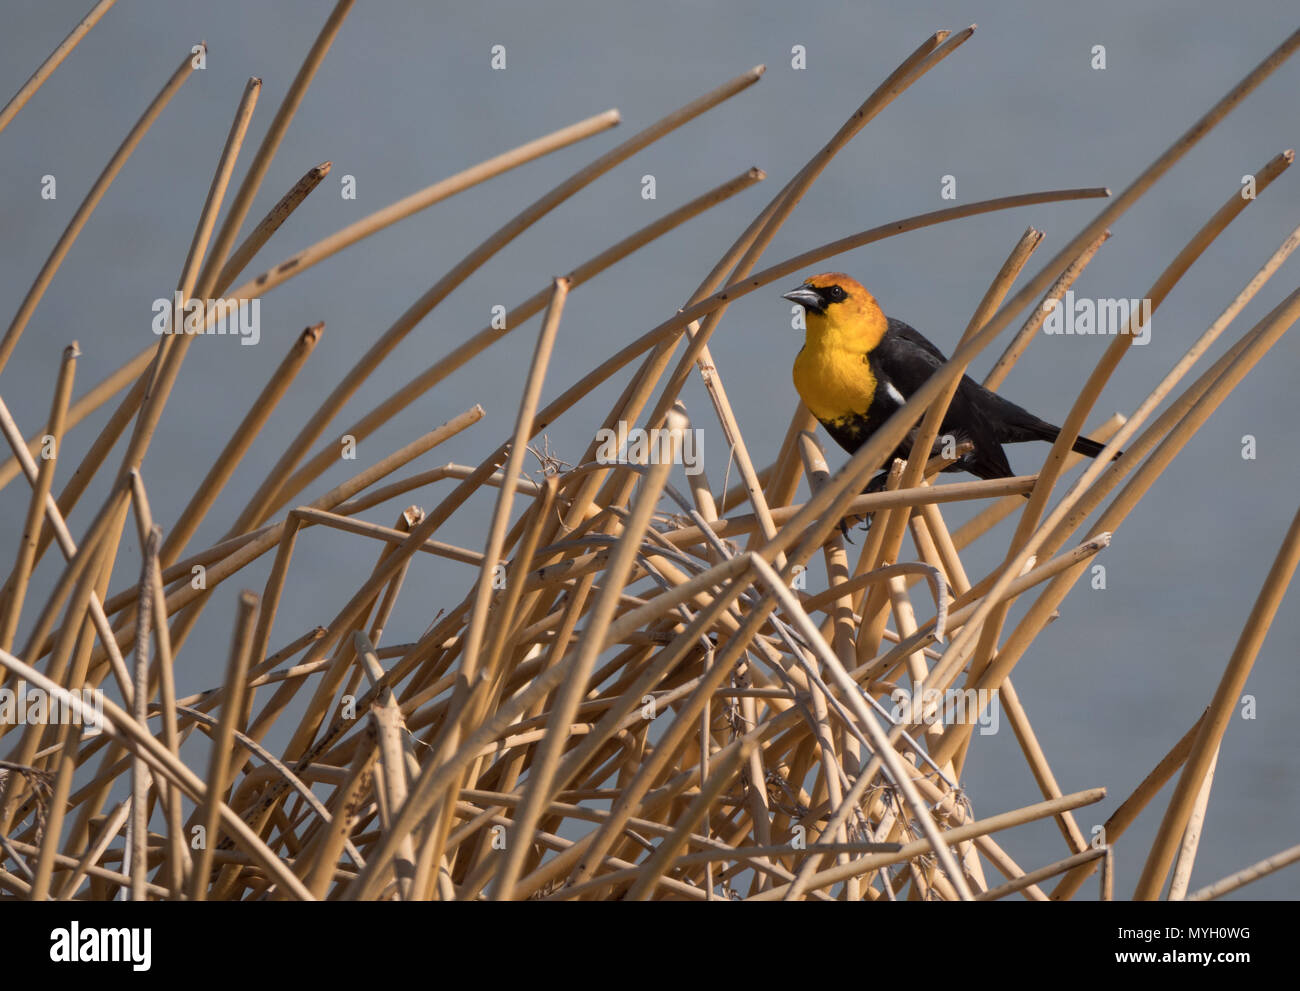 An adult male yellow-headed blackbird perched in dried tan reeds. Photographed in profile with a shallow depth of field. Stock Photo